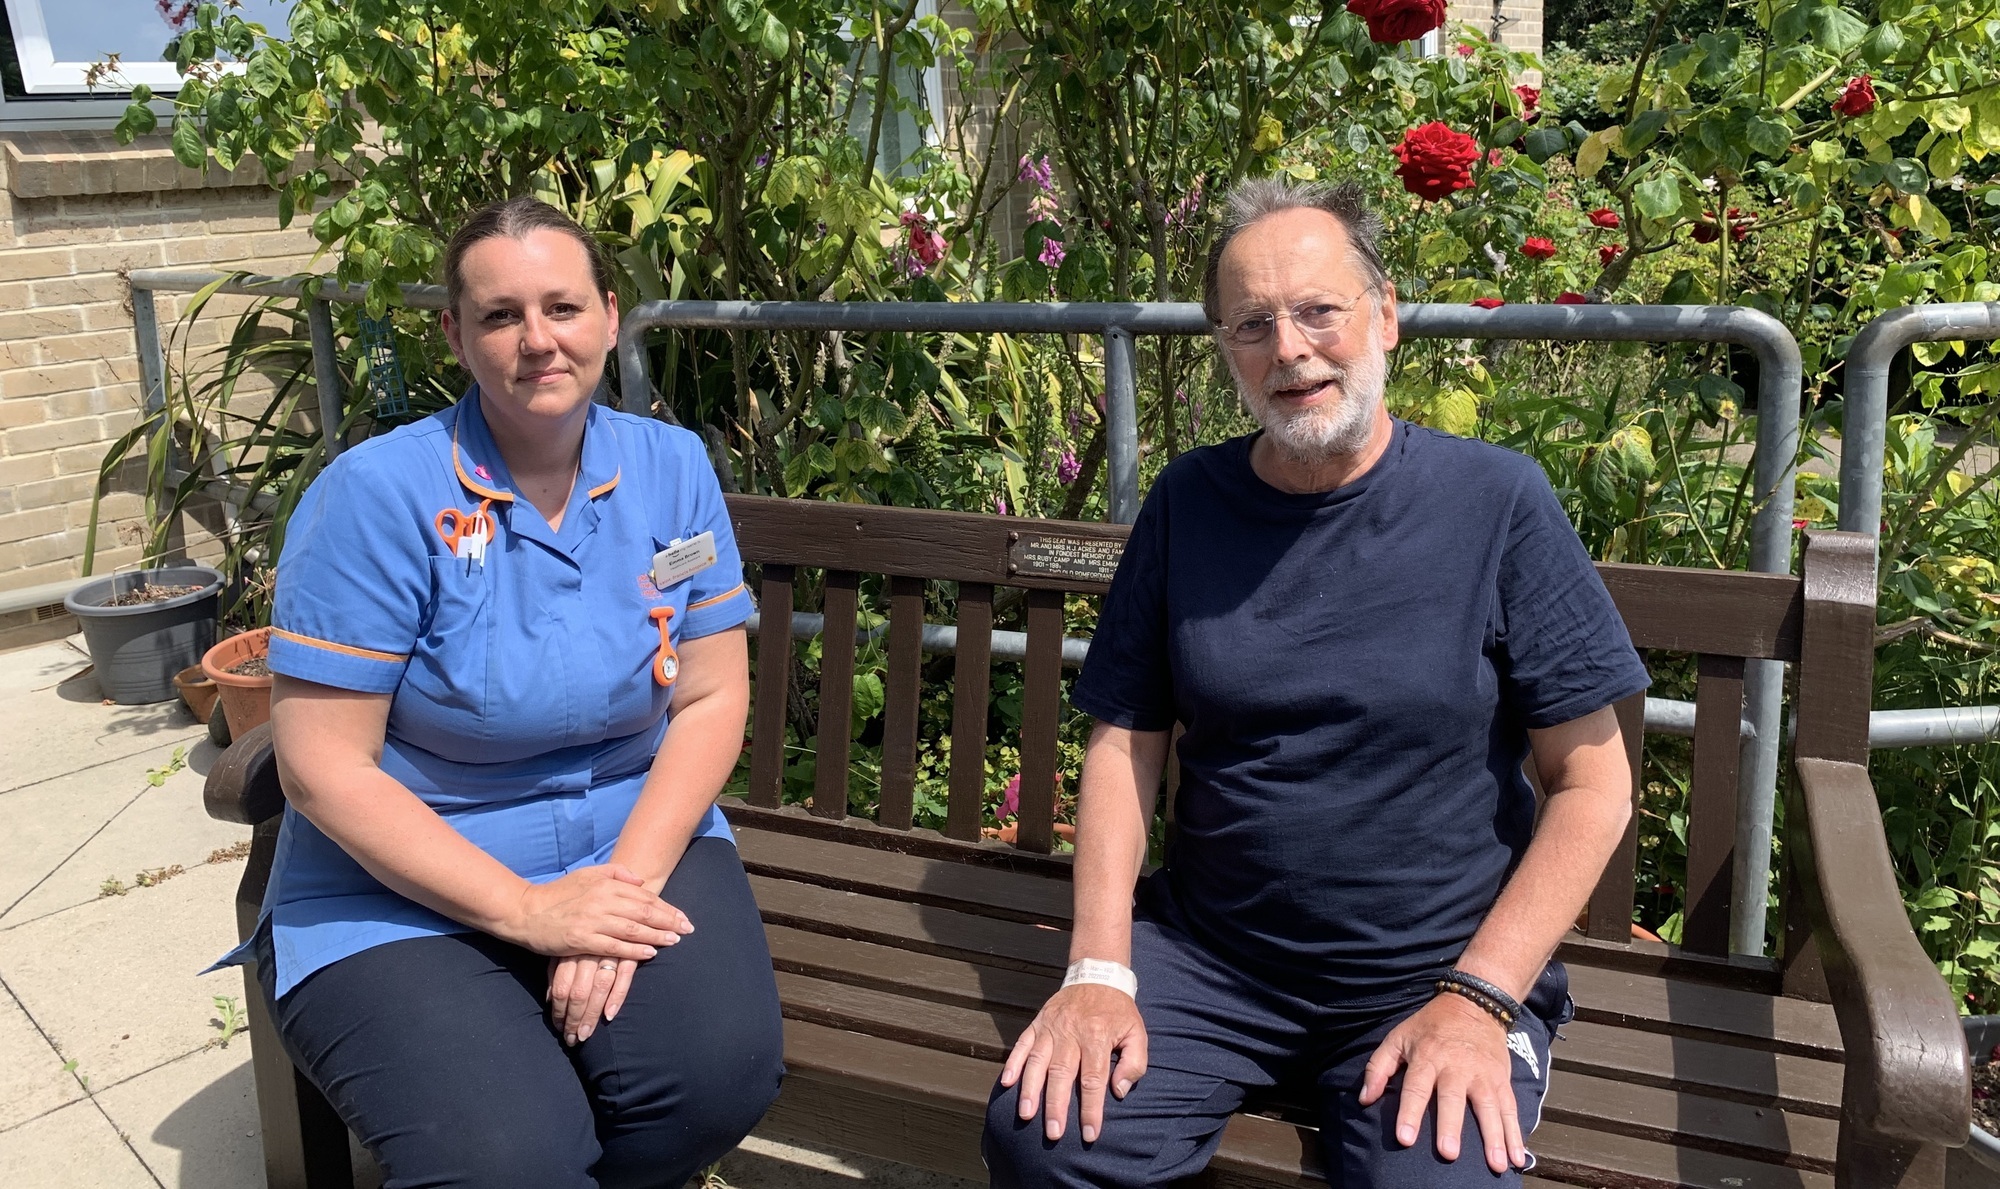 Emma Brown HCA and Steve Haim sitting on a bench in the garden crop